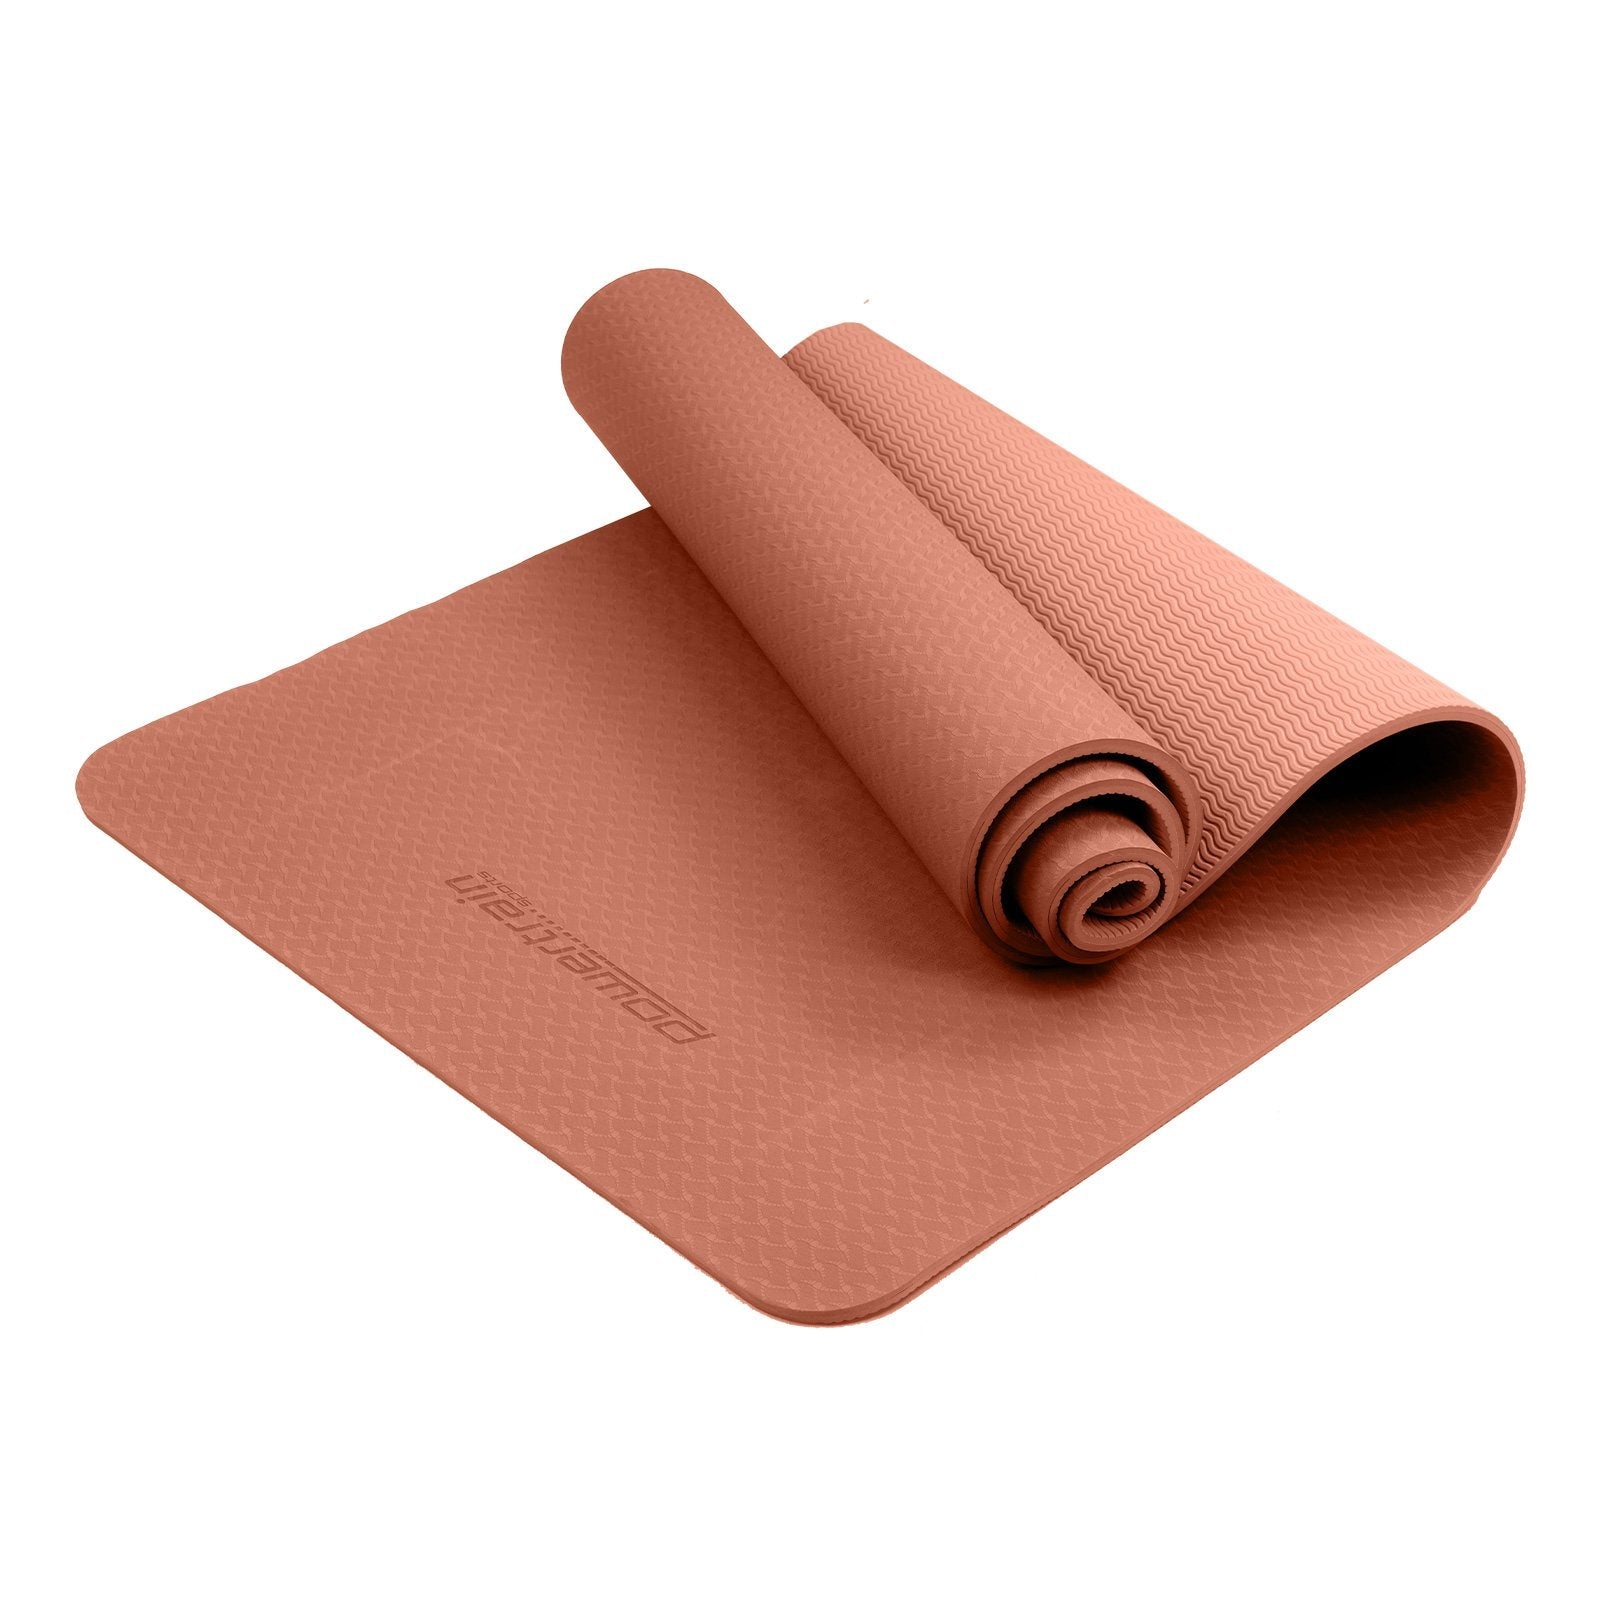 Sports & Fitness > Fitness Accessories - Powertrain Eco-friendly Dual Layer 6mm Yoga Mat | Peach | Non-slip Surface And Carry Strap For Ultimate Comfort And Portability